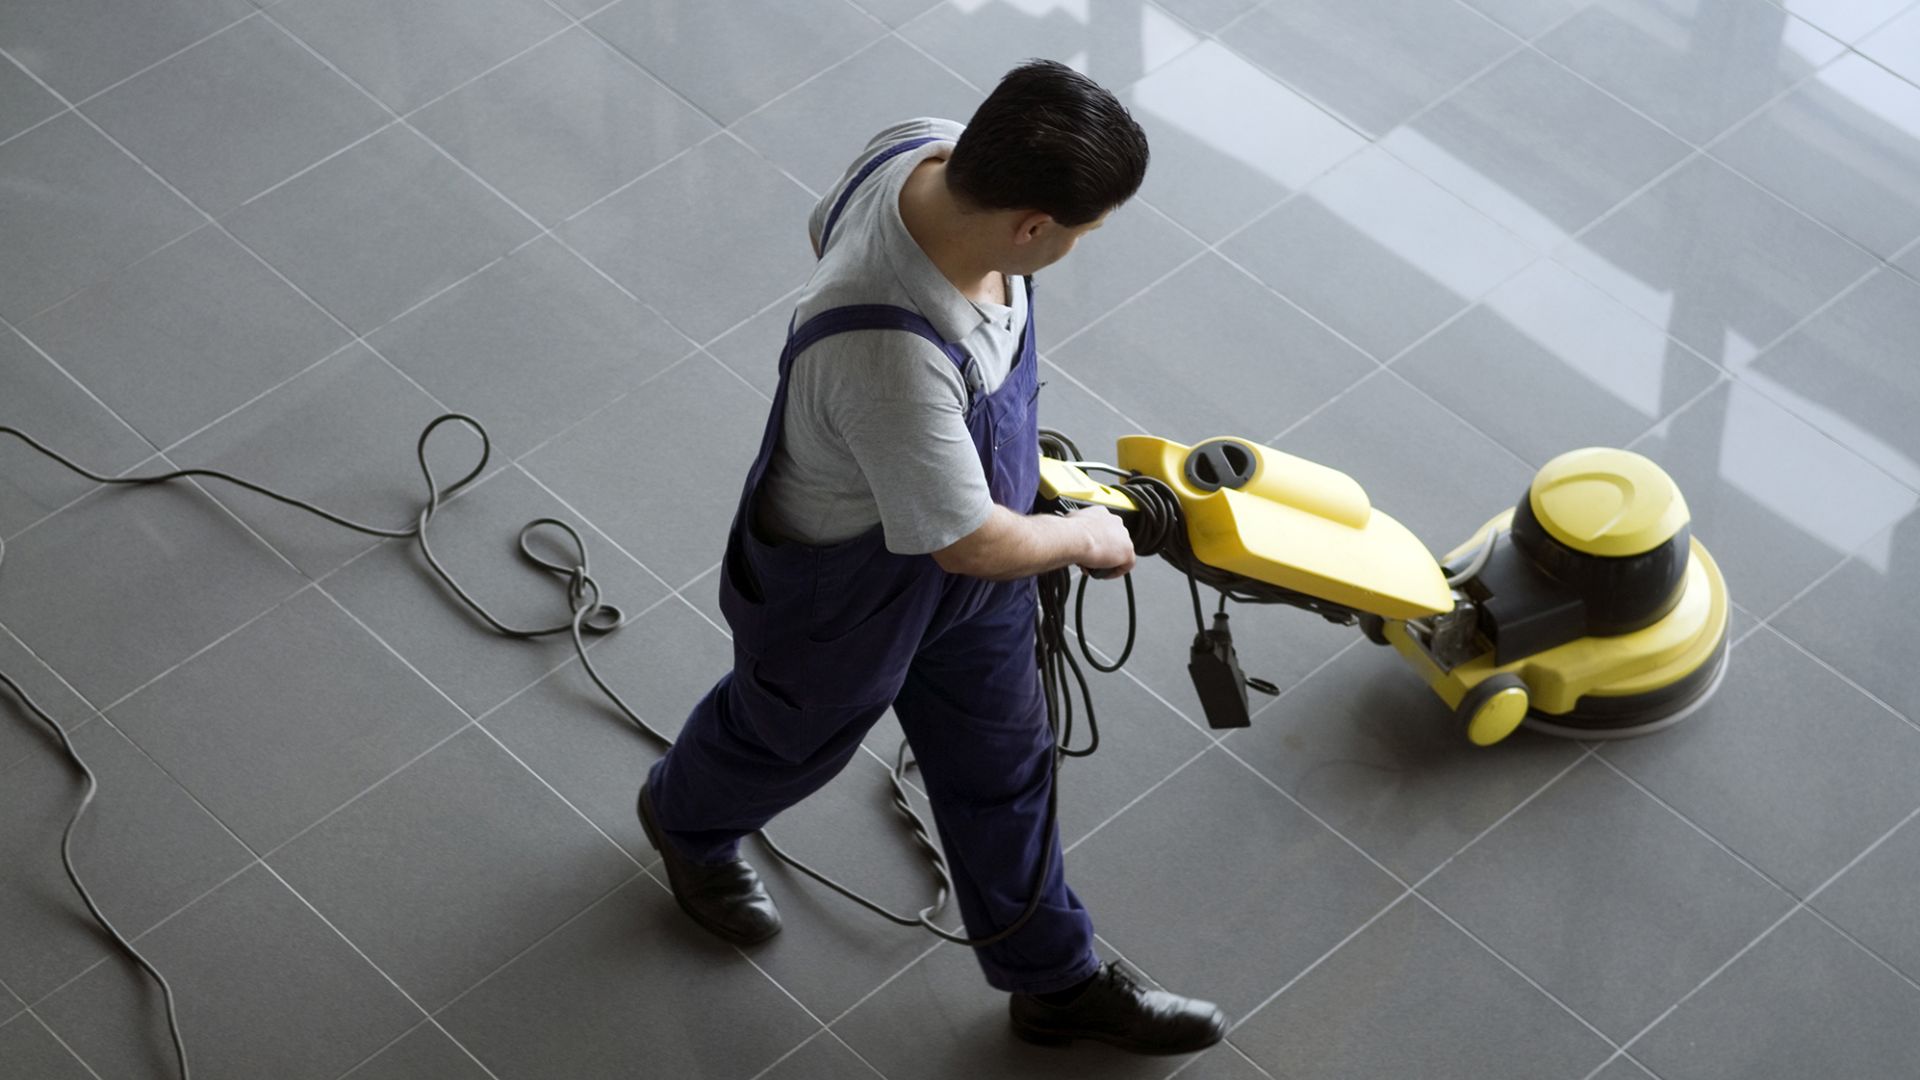 Benefits of Professional Floor Cleaning Services